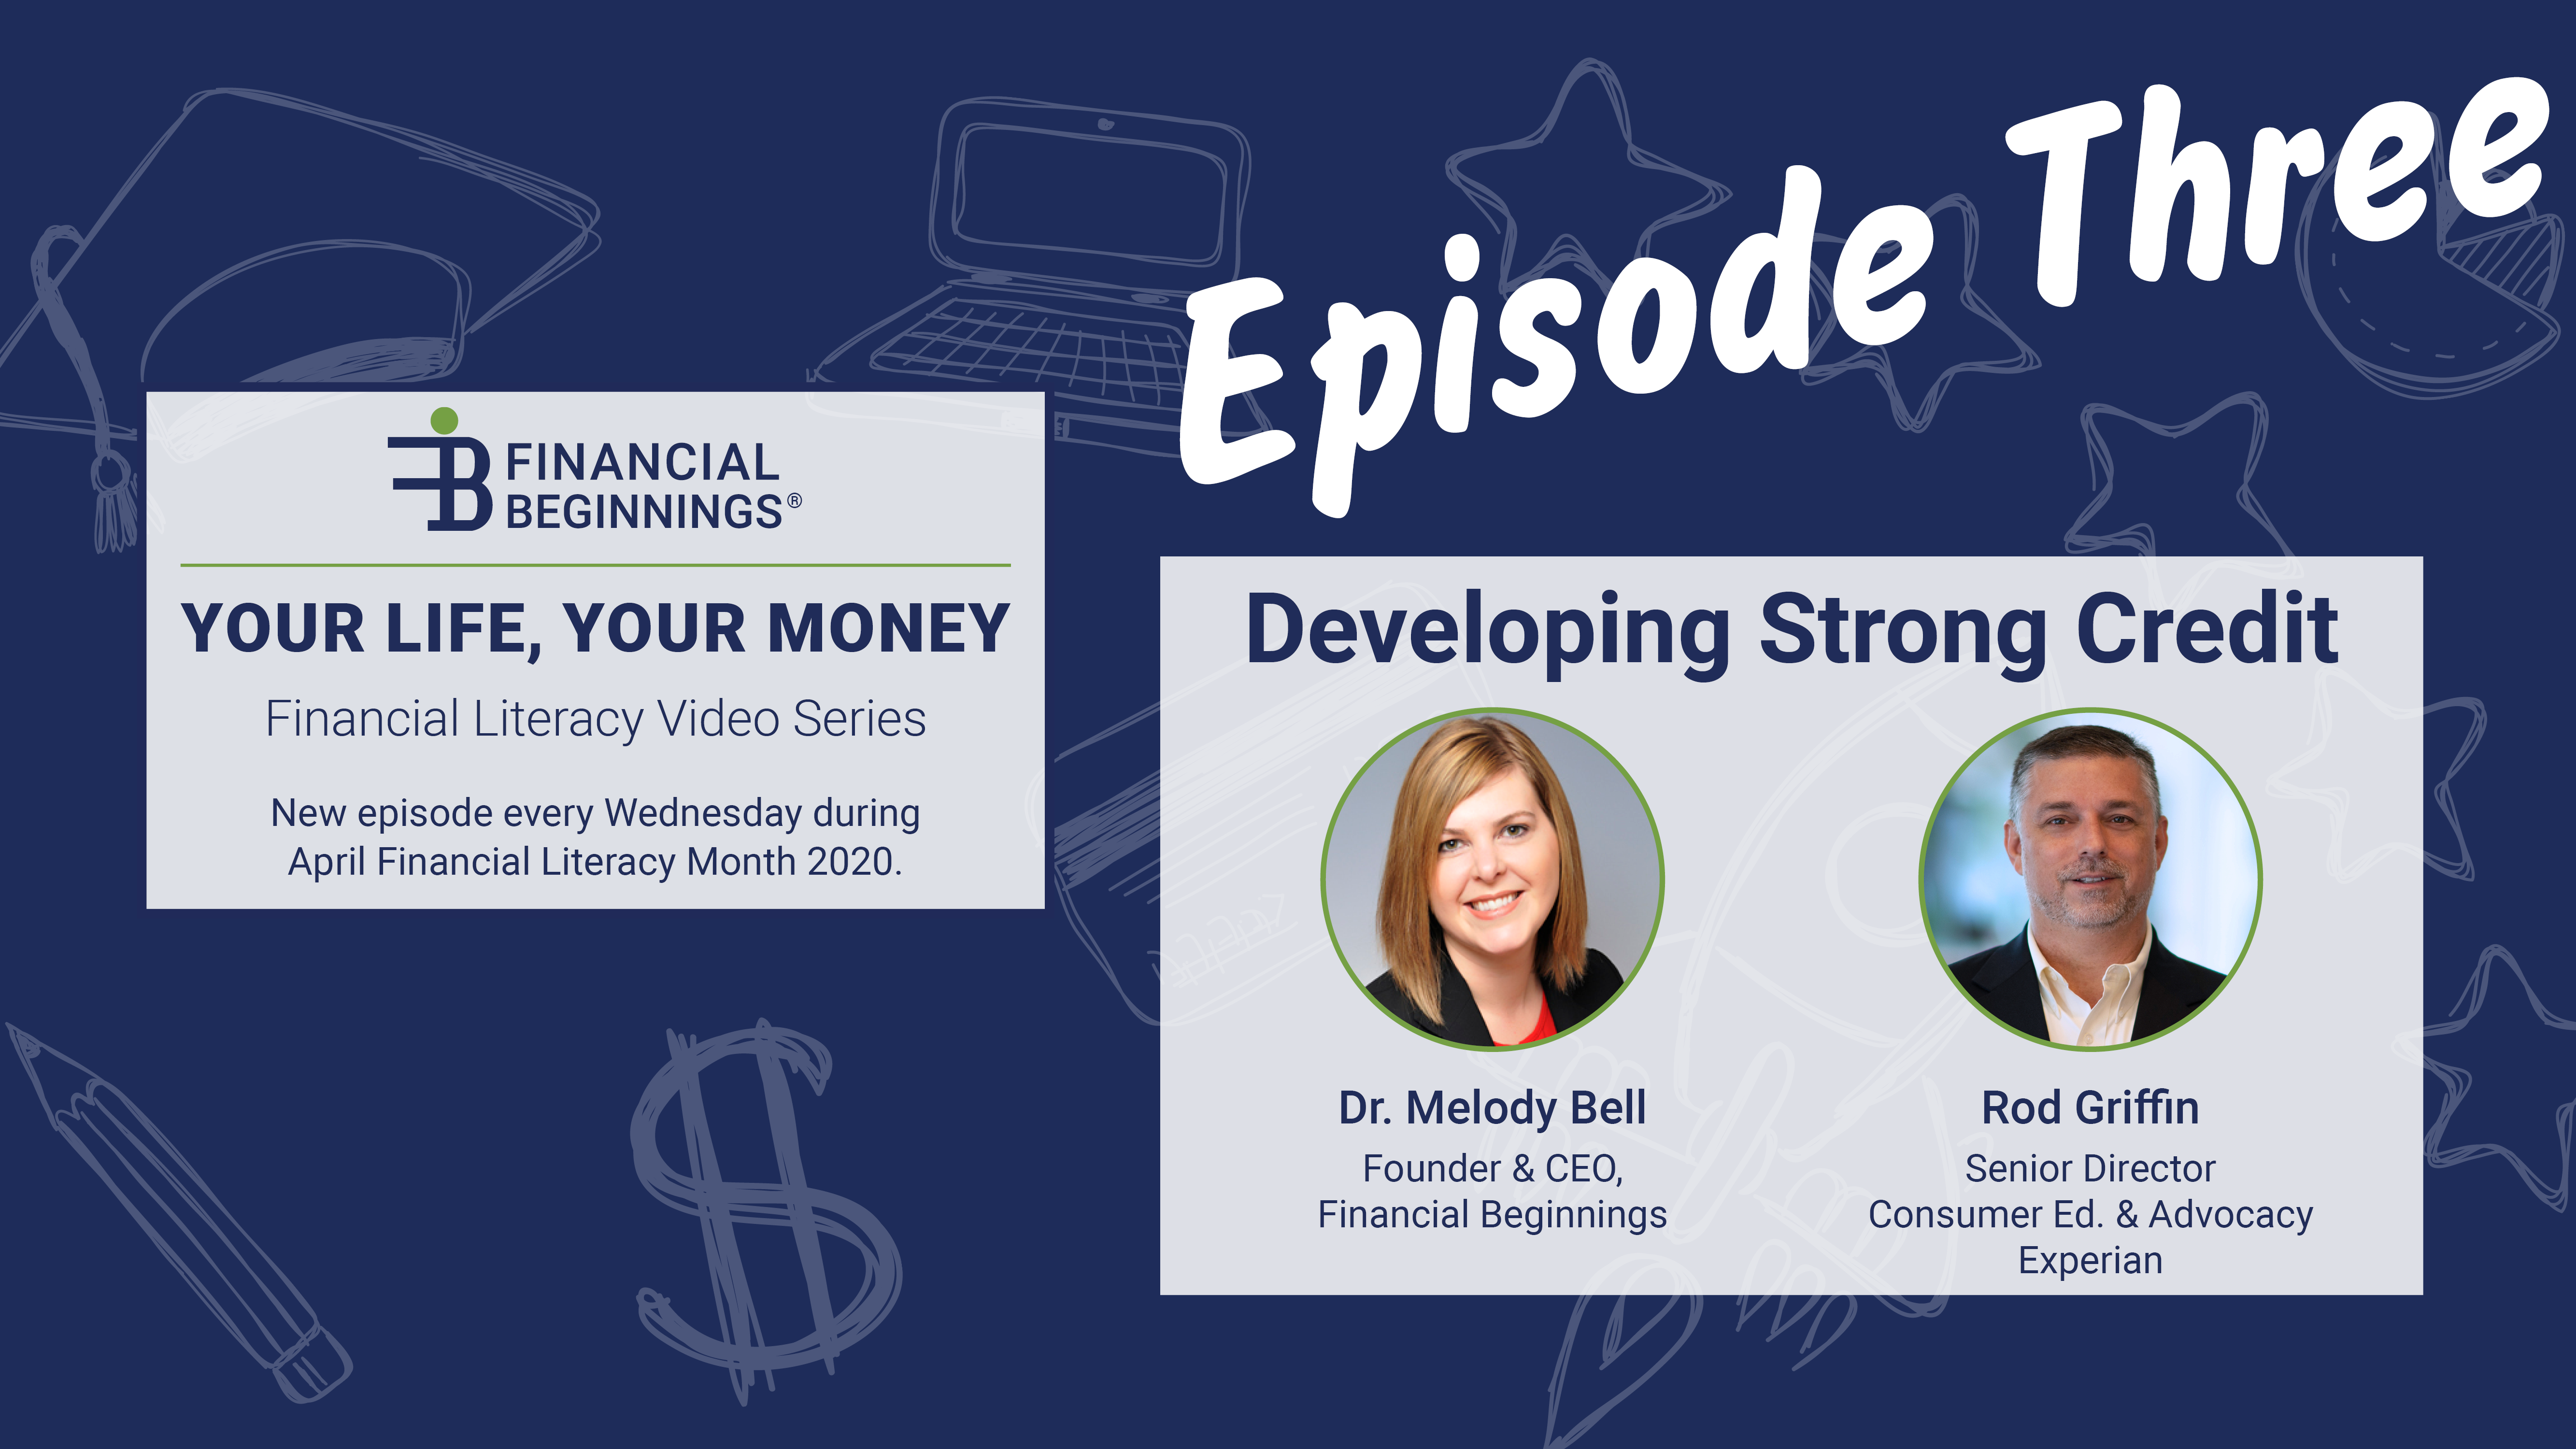 Episode 3: Developing Strong Credit